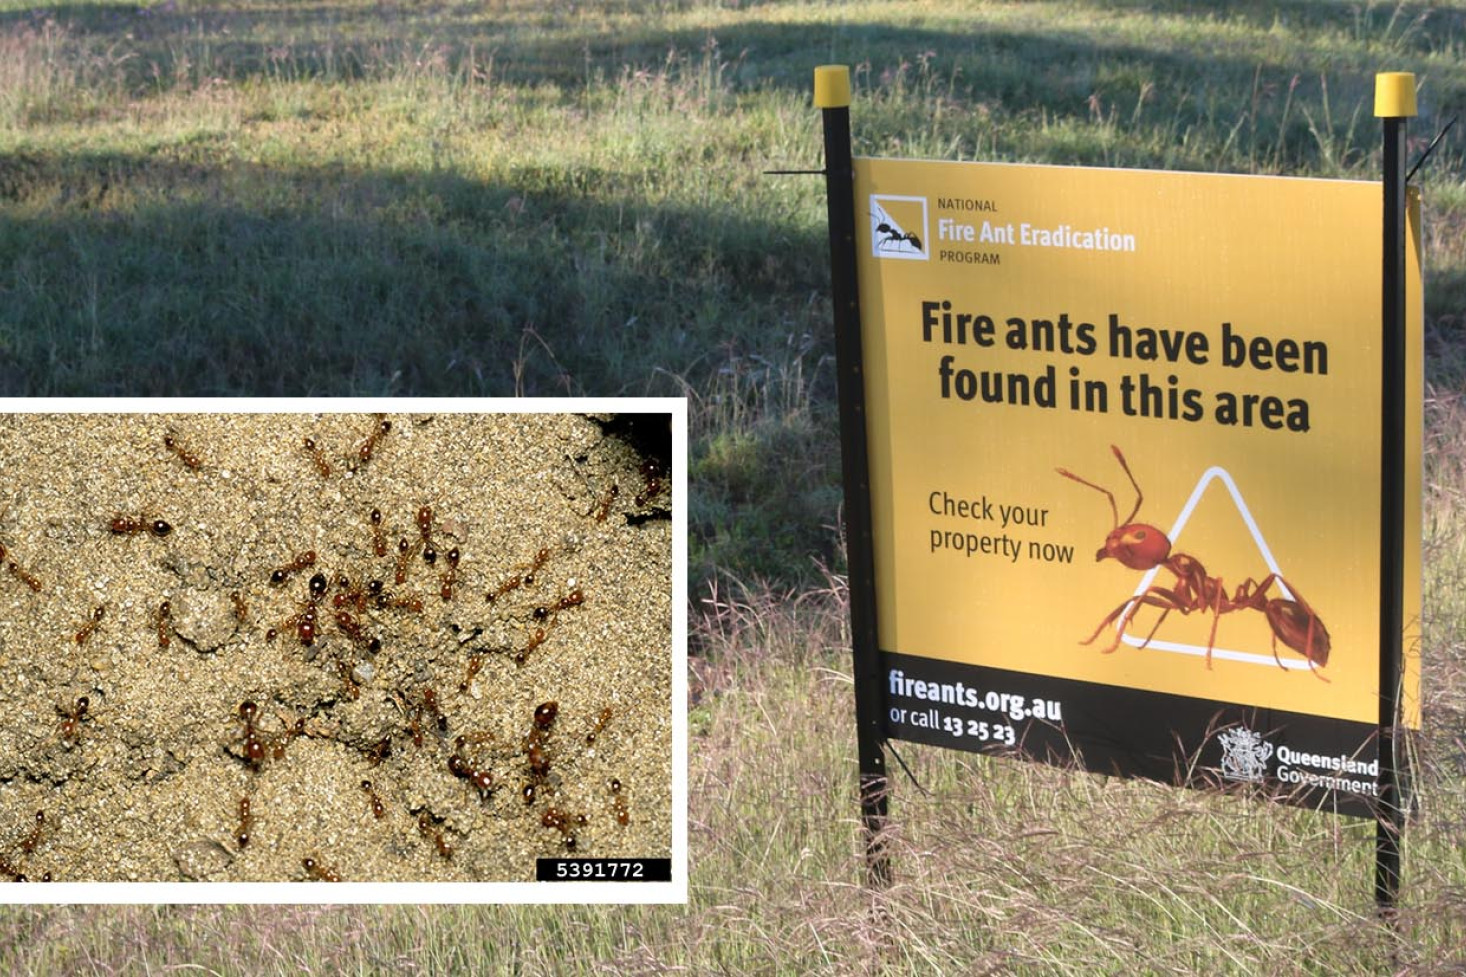 These fire ant warning signs have been placed throughout town. INSET: Fire ants - photo, Barry Rice